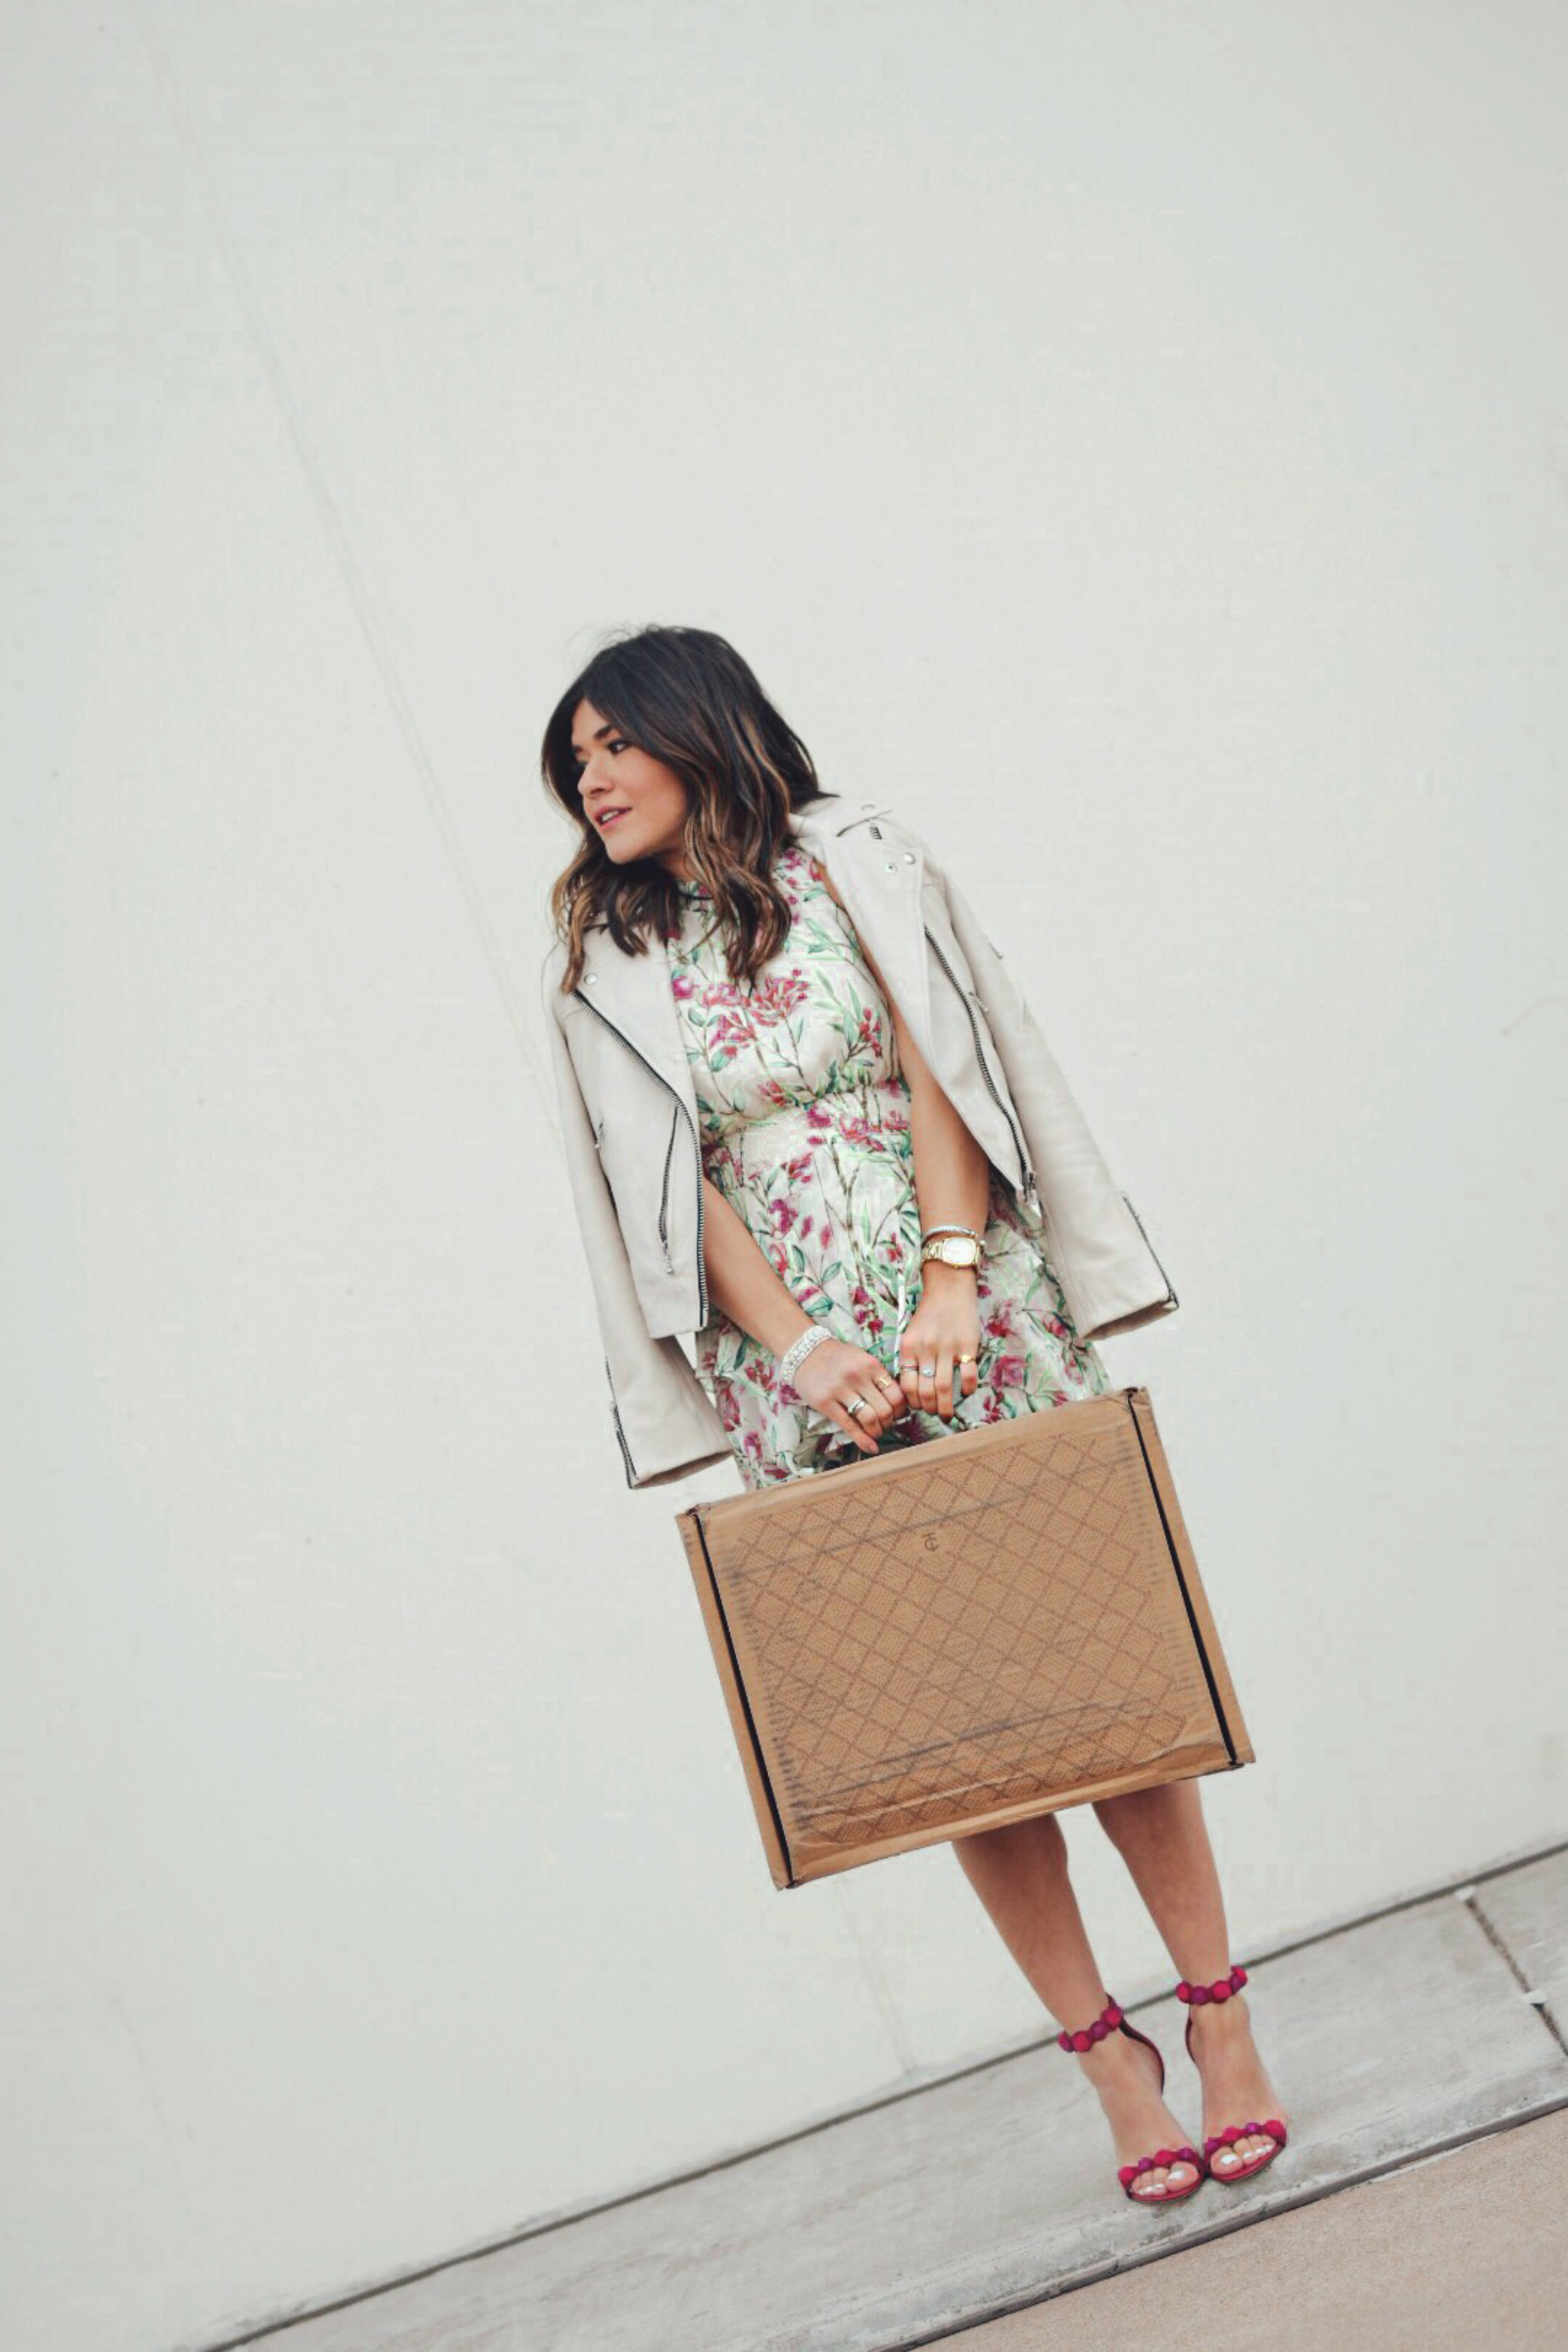 Carolina Hellal of Chic Talk tries Trunk Club styling services and explains why she liked them so much.